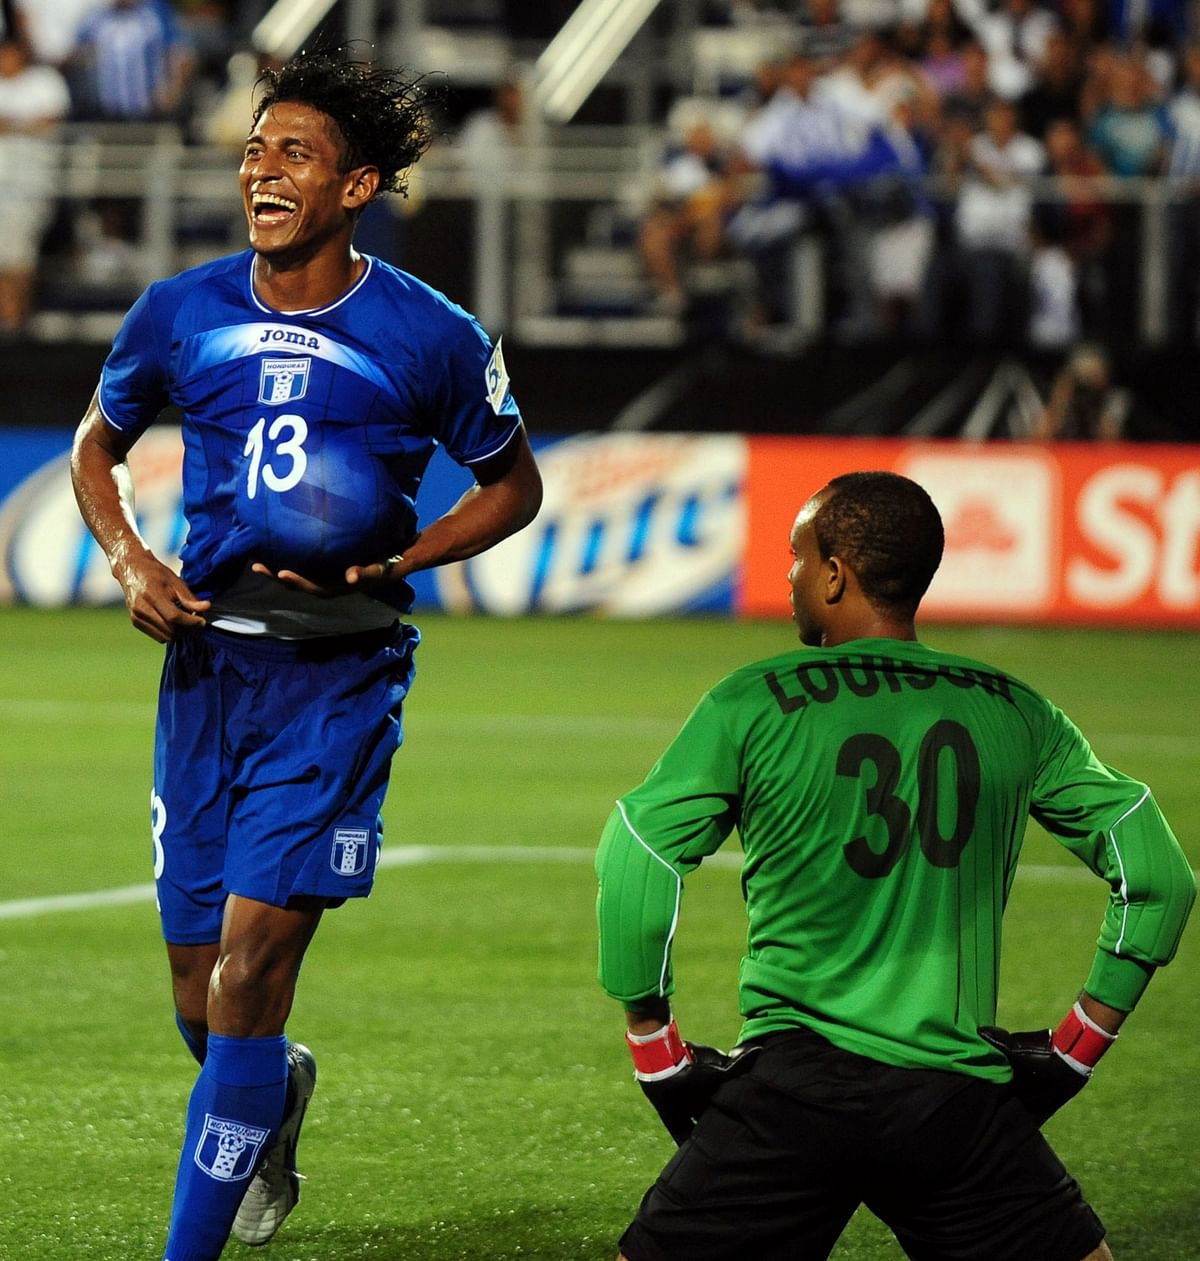 Carlos YaÃ­r Costly (L) of Honduras celebrates a goal before Grenada goalkeeper Shemel Louison (R) during their CONCACAF Gold Cup match at the FIU Stadium in Miami, Florida on June 10, 2011. Honduras defeated Grenada 7-1. AFP